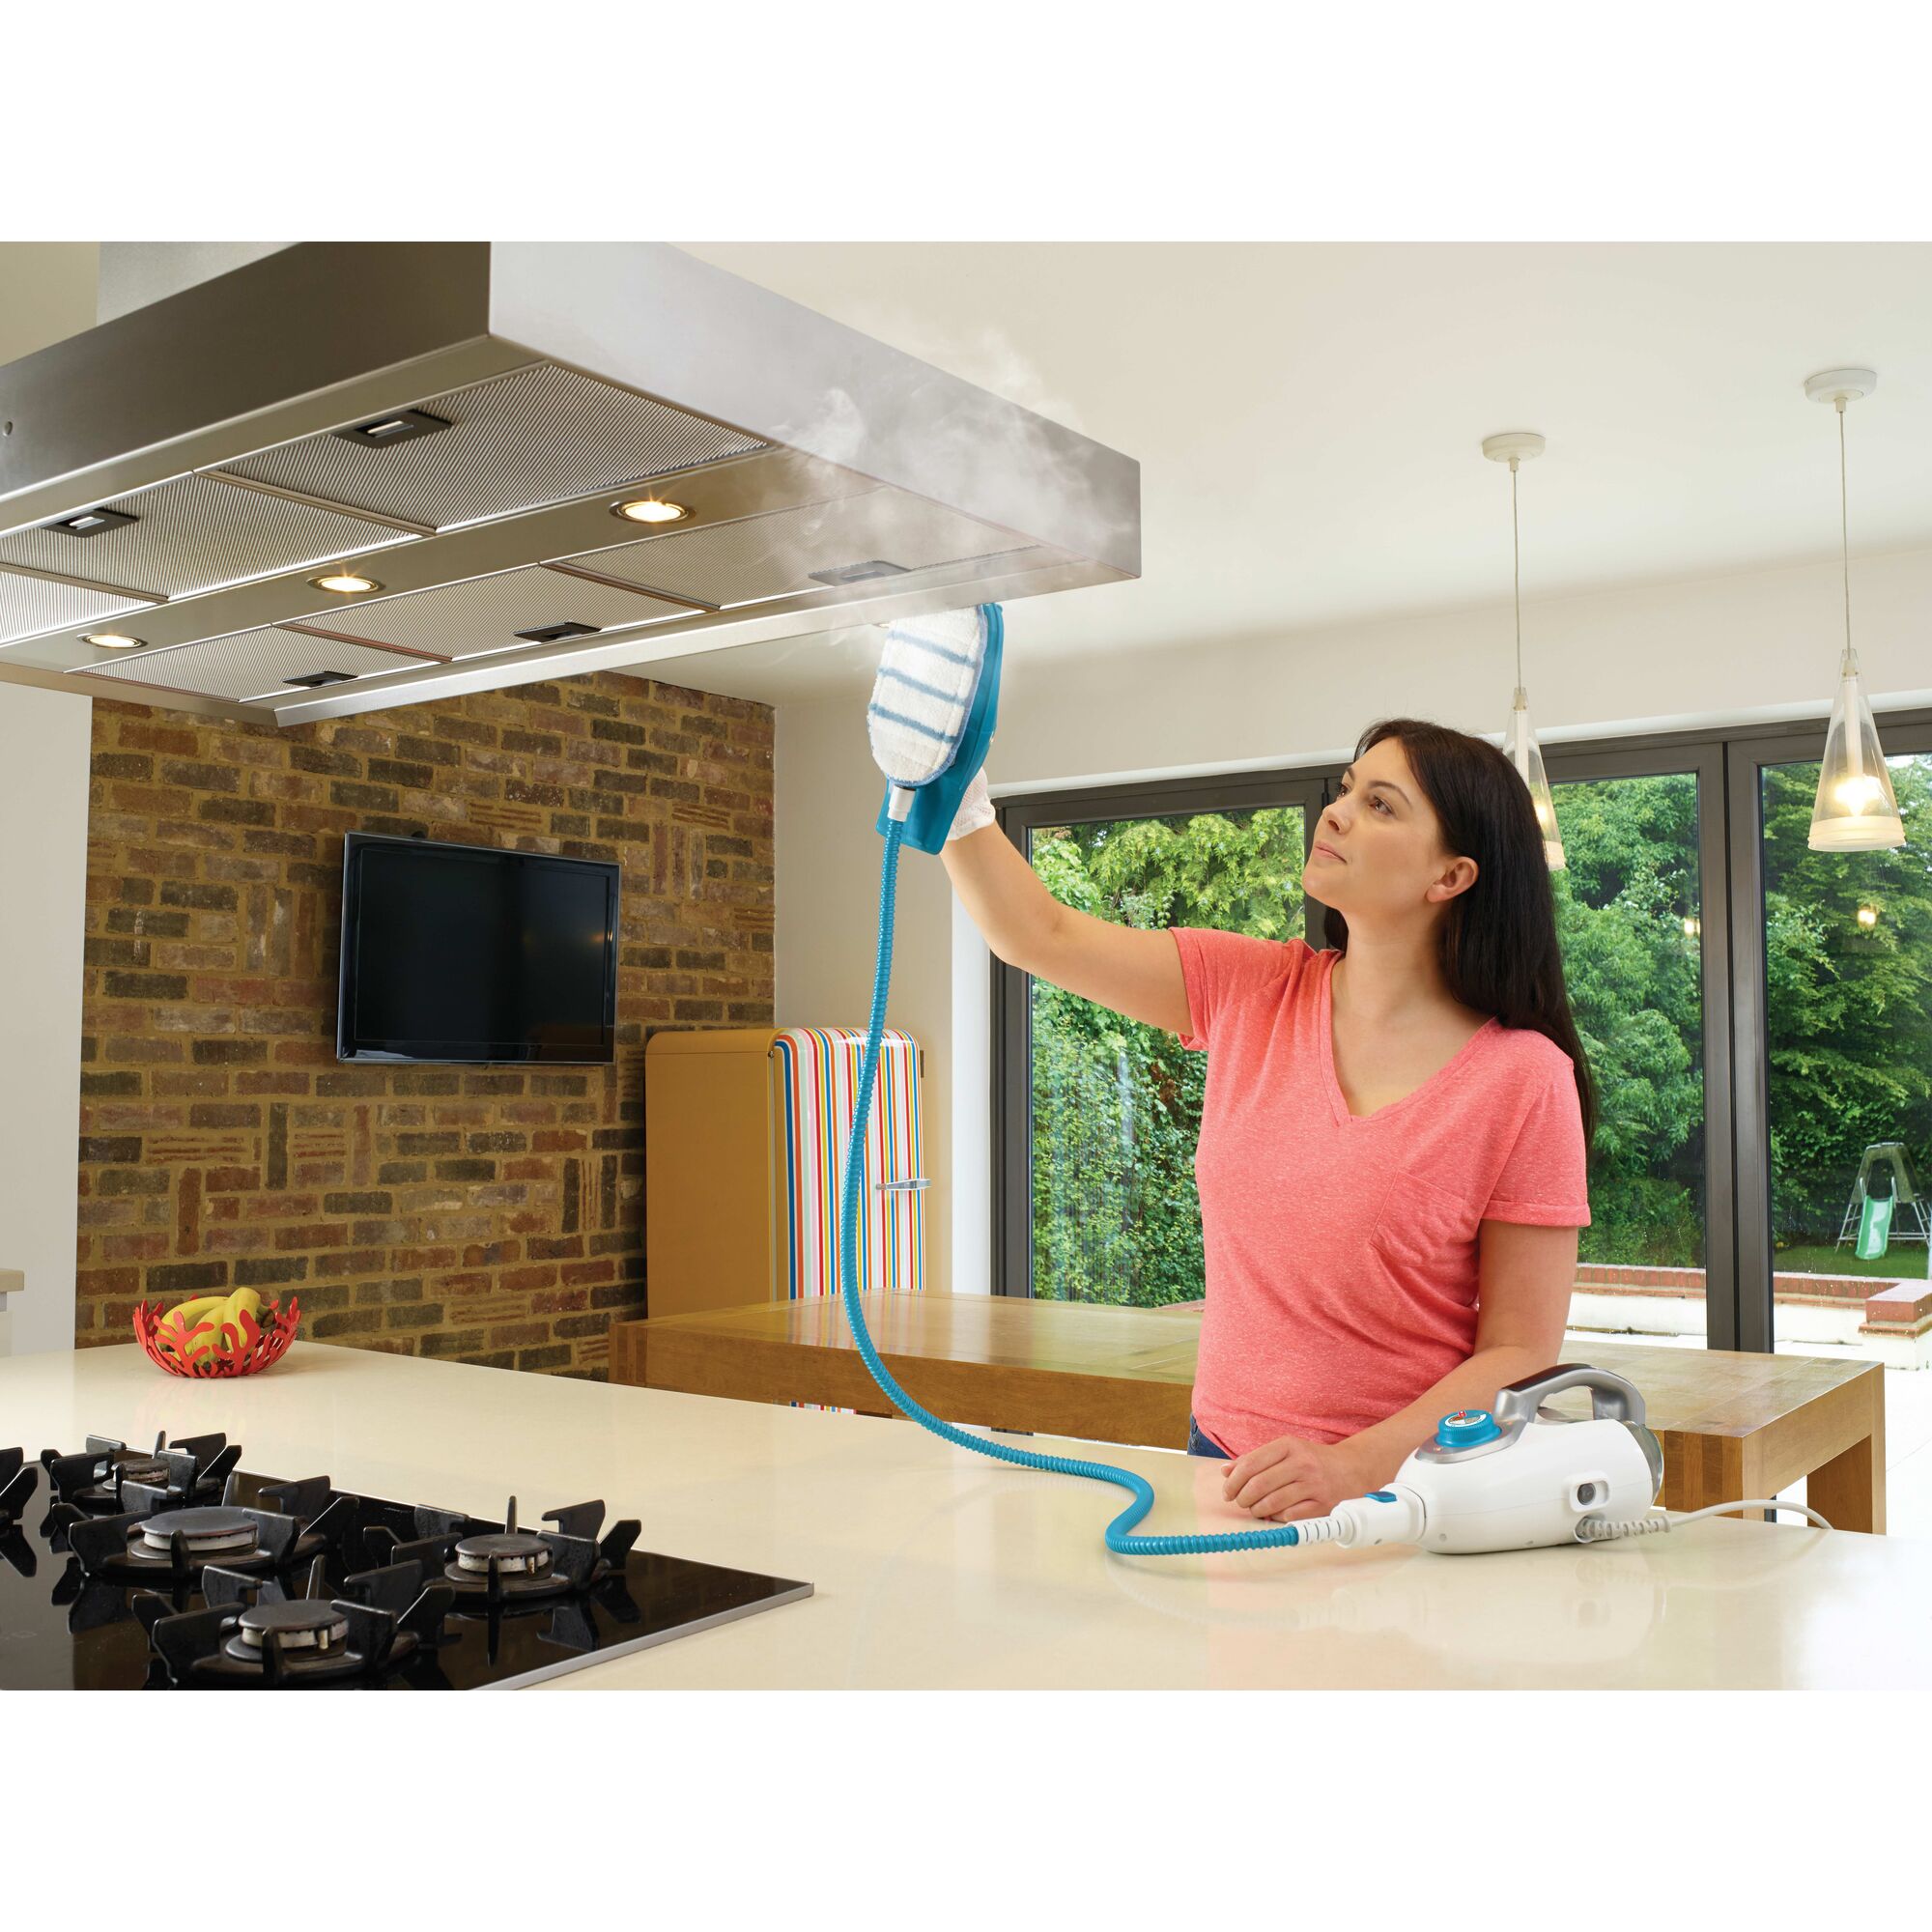 7 in 1 Steam Mop with steamglove handheld steamer being used to clean stovetop vent.